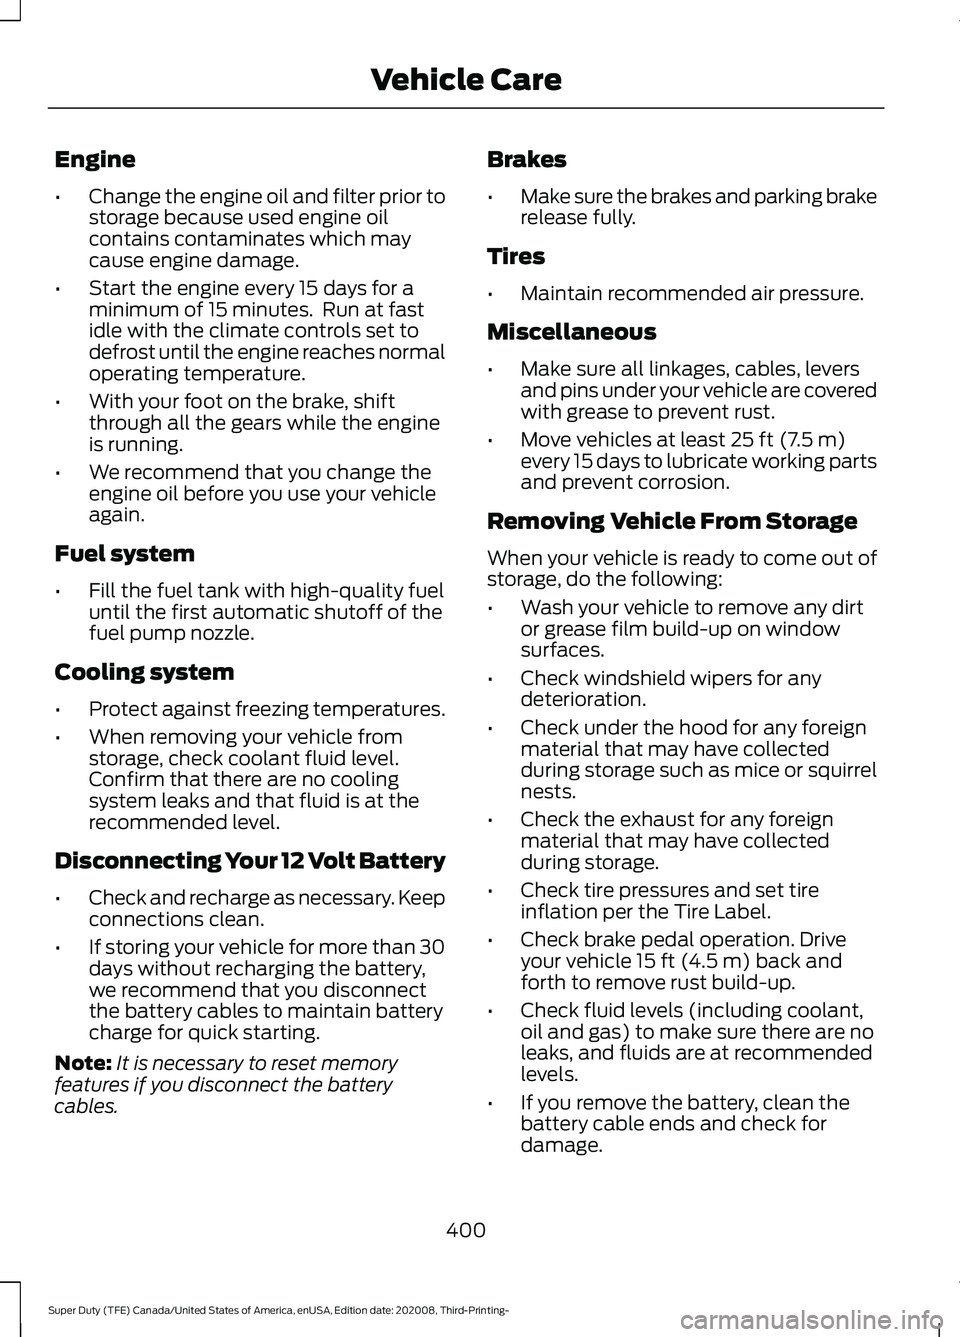 FORD F-550 2021  Owners Manual Engine
•
Change the engine oil and filter prior to
storage because used engine oil
contains contaminates which may
cause engine damage.
• Start the engine every 15 days for a
minimum of 15 minutes